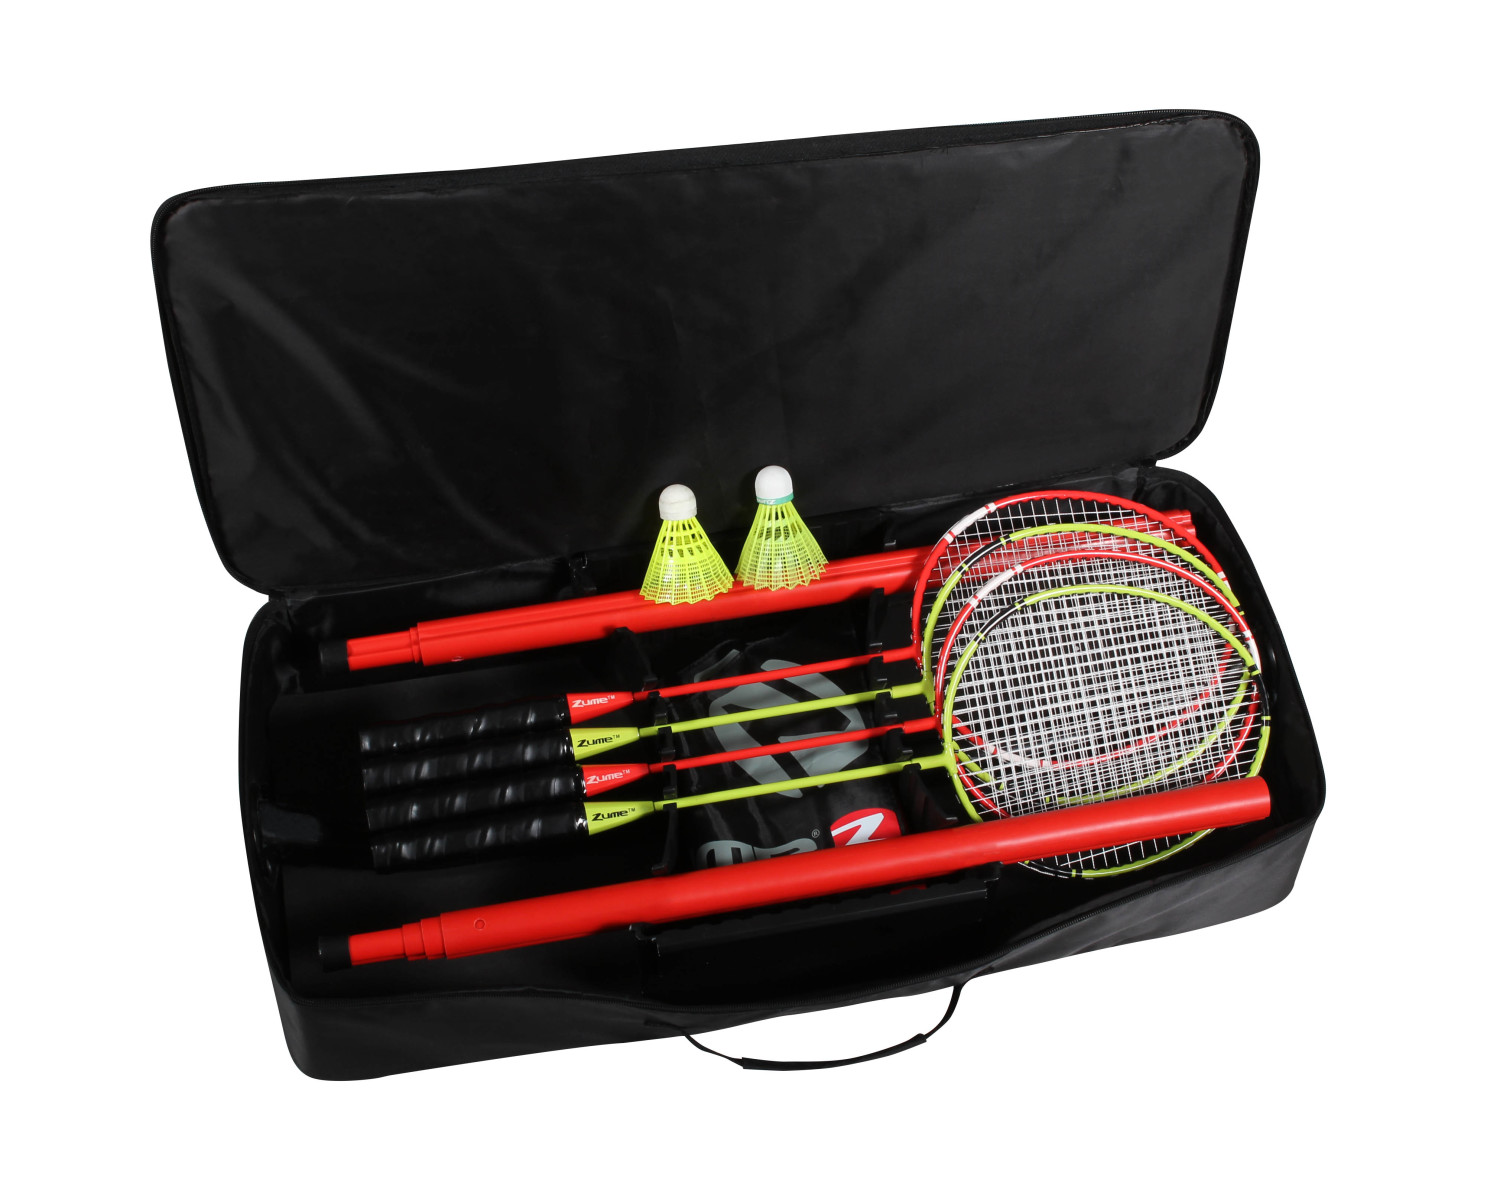 Zume Games Portable Badminton Set with Freestanding Base Sets Up on Any Surface in Seconds. No Tools or Stakes Required - image 4 of 12